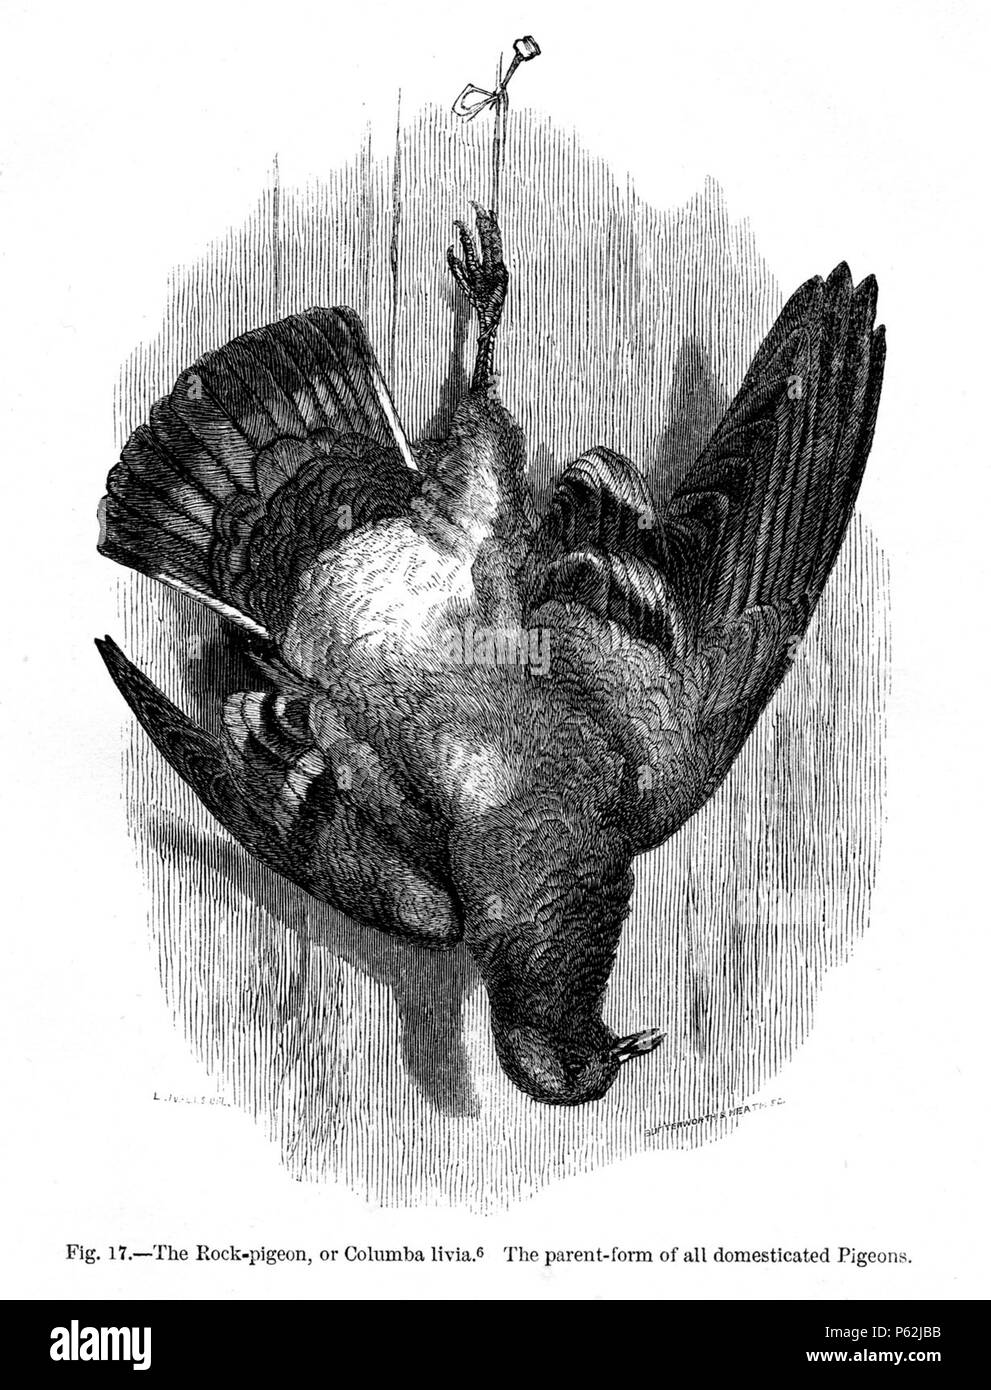 N/A. English: Figure 17 - 'The Rock-Pigeon or Columbia livia' from Charles Darwin's book Variation of Animals and Plants Under Domestication published in 1868. January 1868.   Charles Darwin  (1809–1882)       Alternative names Charles Robert Darwin  Description British naturalist and author  Date of birth/death 12 February 1809 19 April 1882  Location of birth/death The Mount, Shrewsbury Down House  Authority control  : Q1035 VIAF:27063124 ISNI:0000 0001 2125 1077 ULAN:500228559 LCCN:n78095637 NARA:10580367 WorldCat 413 Darwin Variation Fig17 Stock Photo